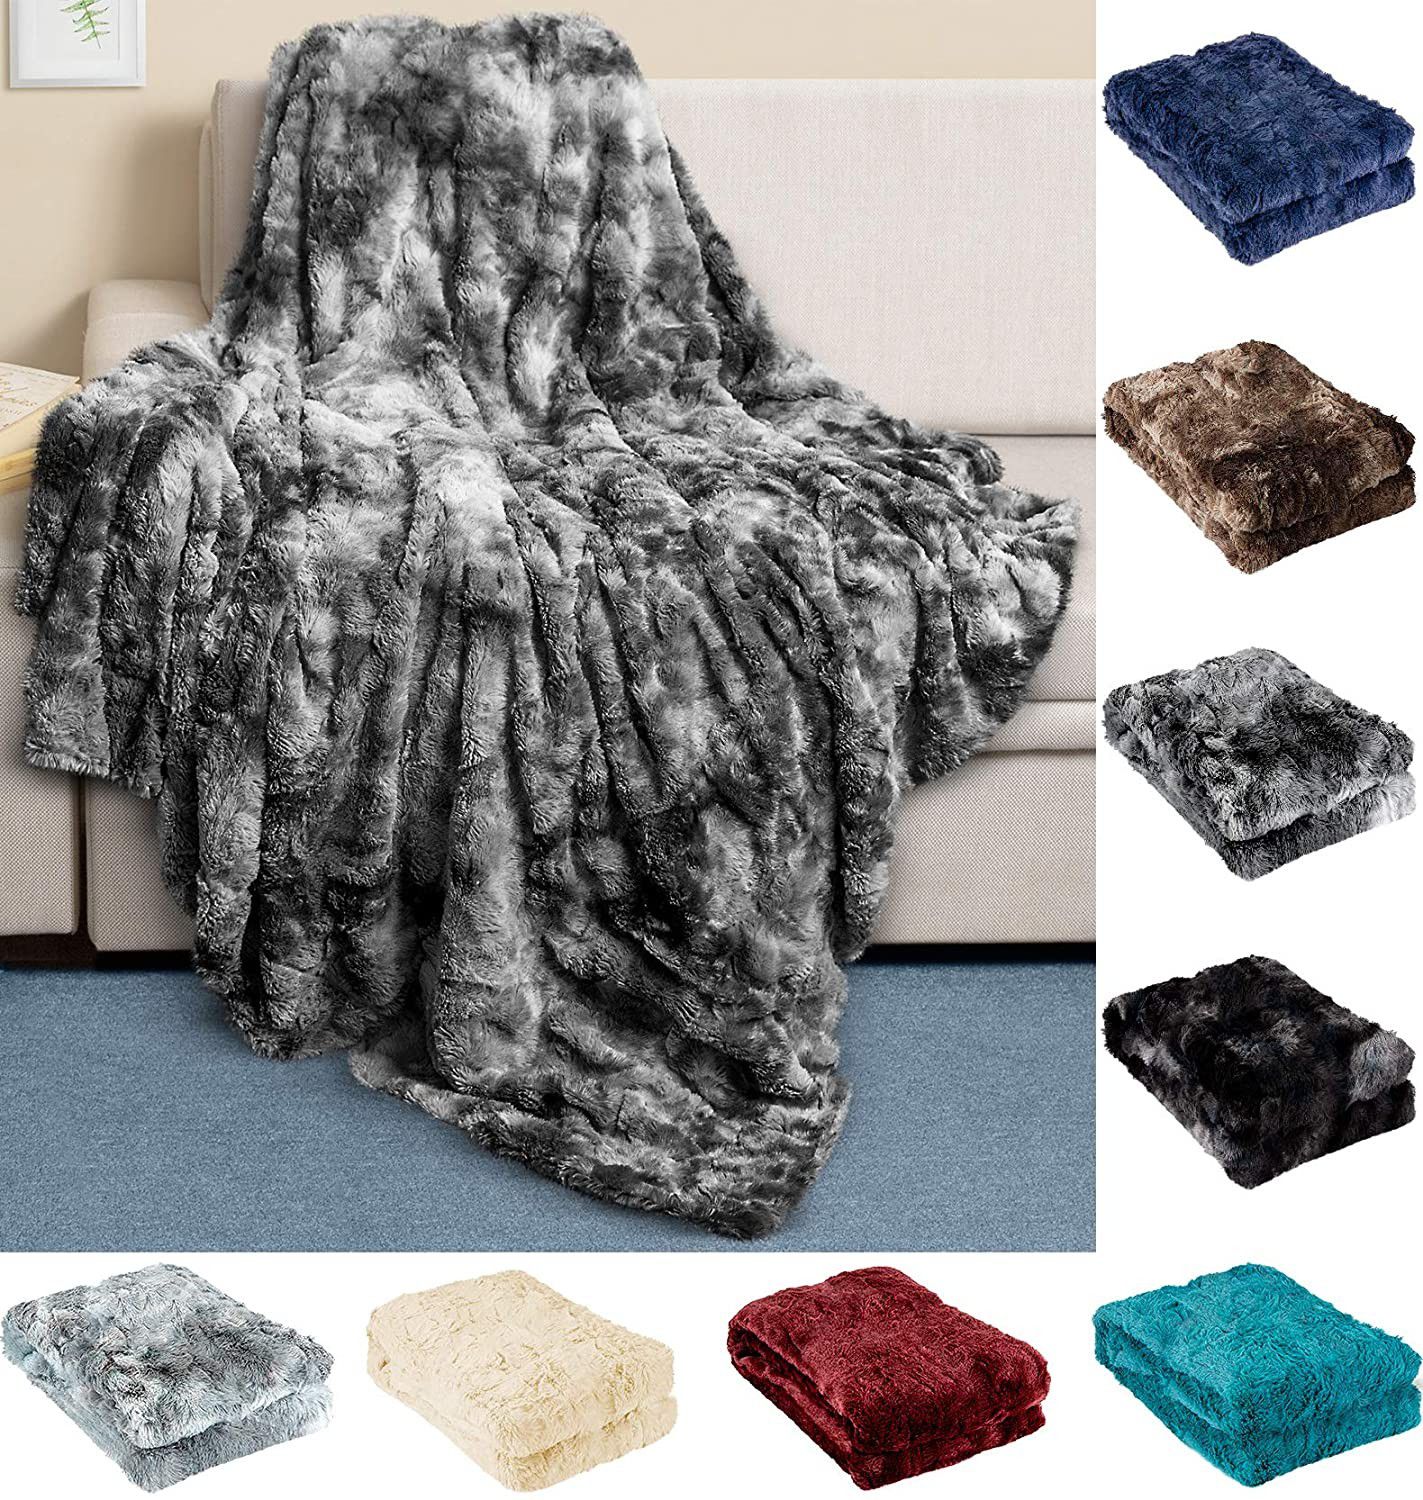 Faux Fur Throw Blanket - Ultra Soft and Fluffy - Plush Throw Blankets for Couch Bed and Living Room - Fall Winter and Spring - 50x65 (Full Size) Gray